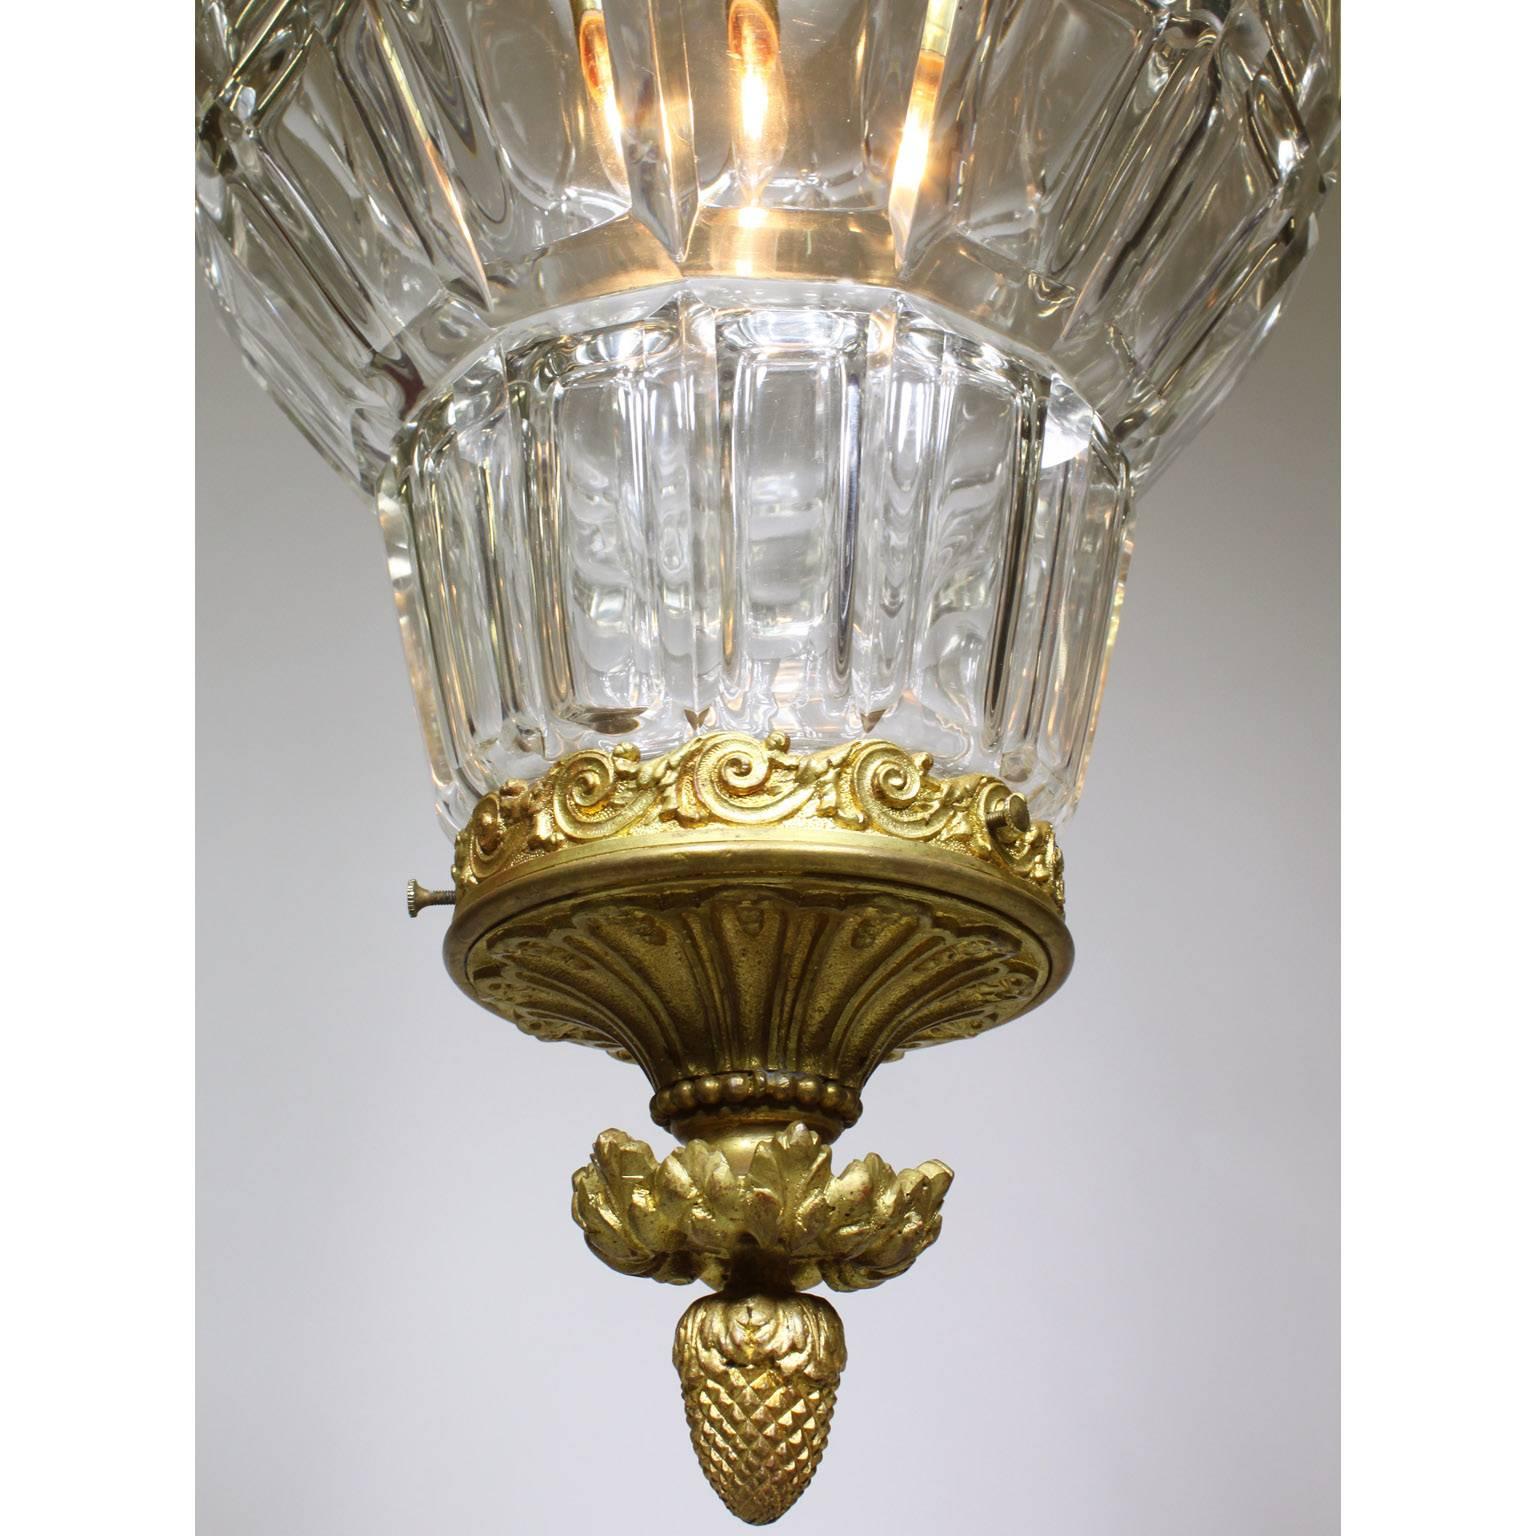 French 19th-20th Century Gilt-Bronze and Cut-Glass 